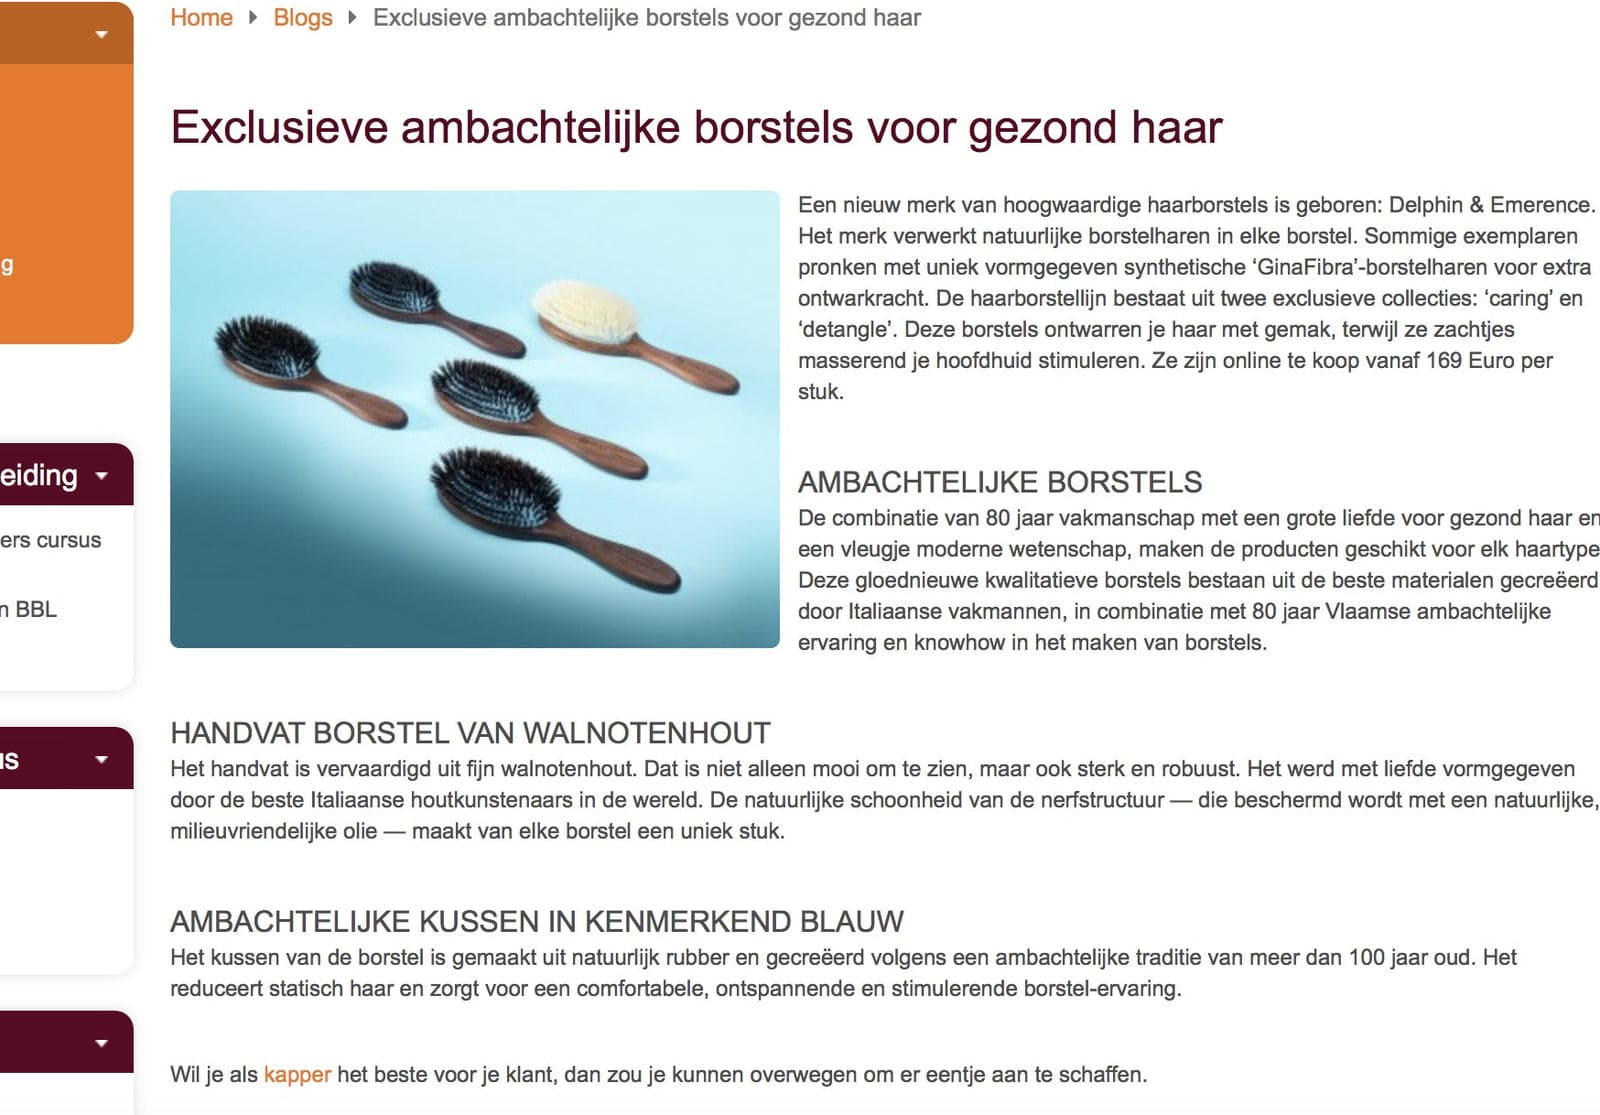 Featured in beautyprofs.nl